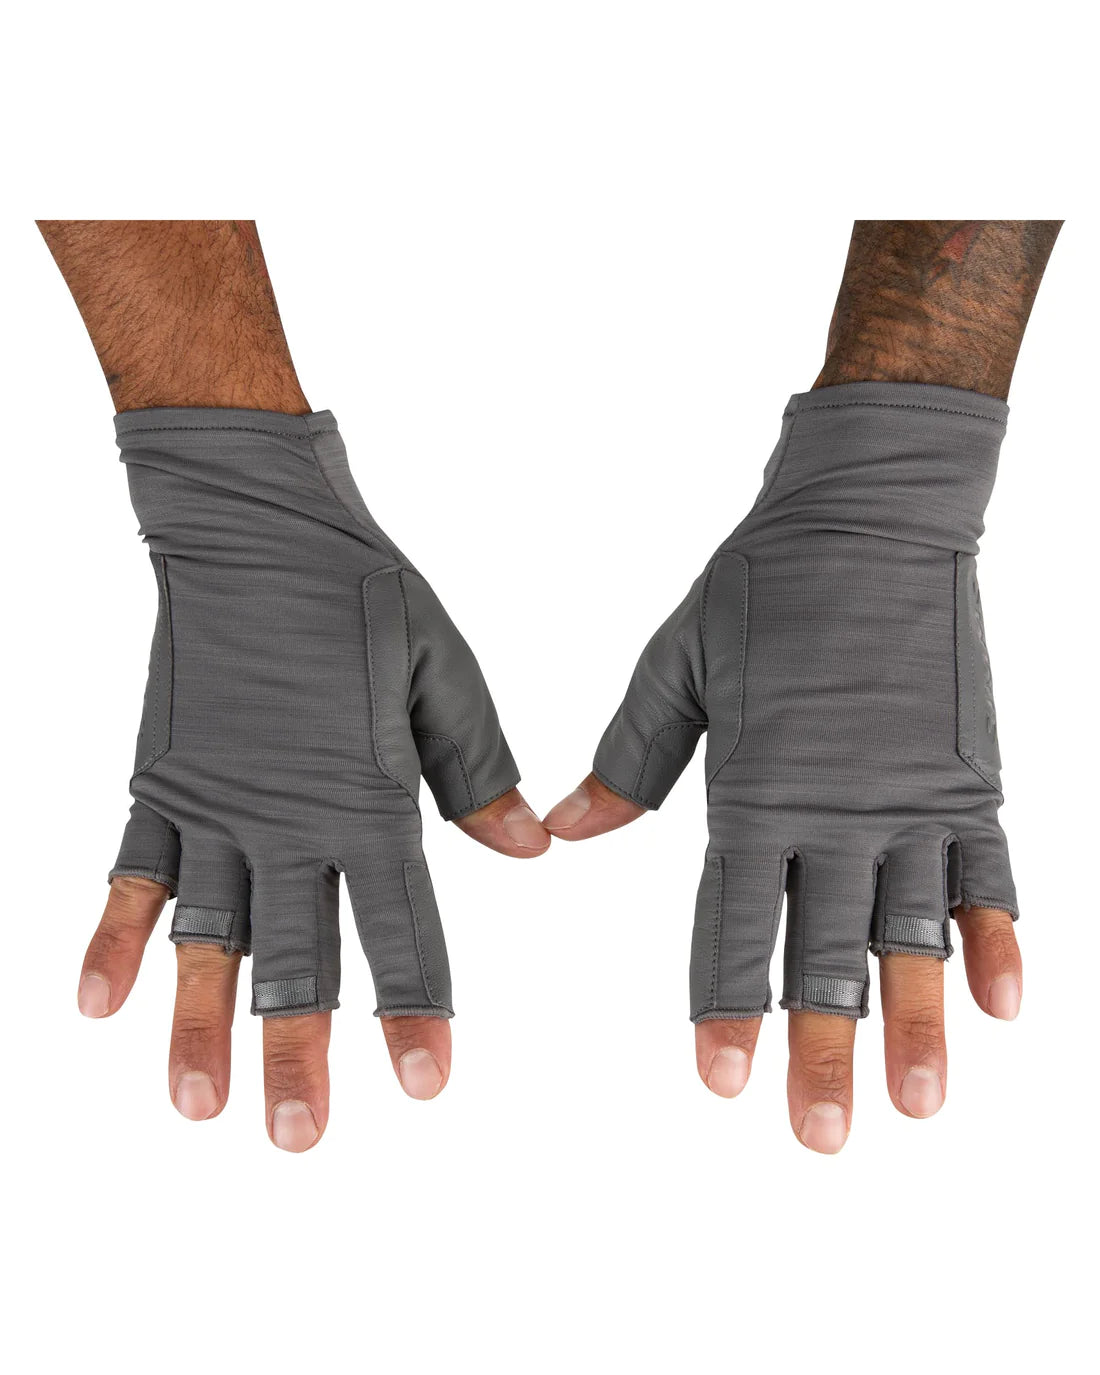 Simms Solarflex Guide Glove -  - Mansfield Hunting & Fishing - Products to prepare for Corona Virus